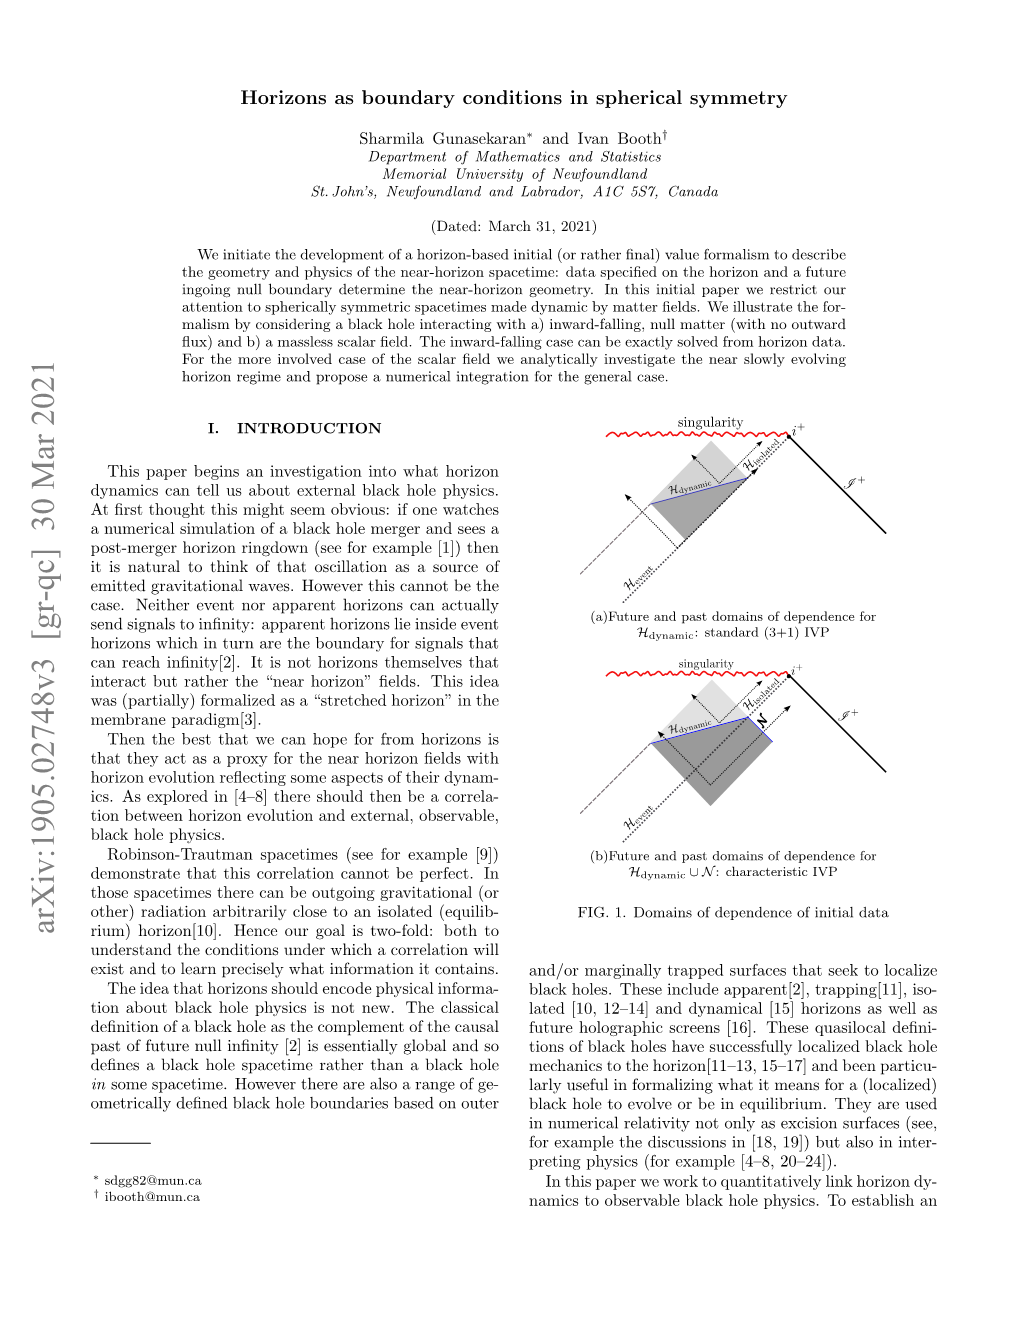 Horizons As Boundary Conditions in Spherical Symmetry